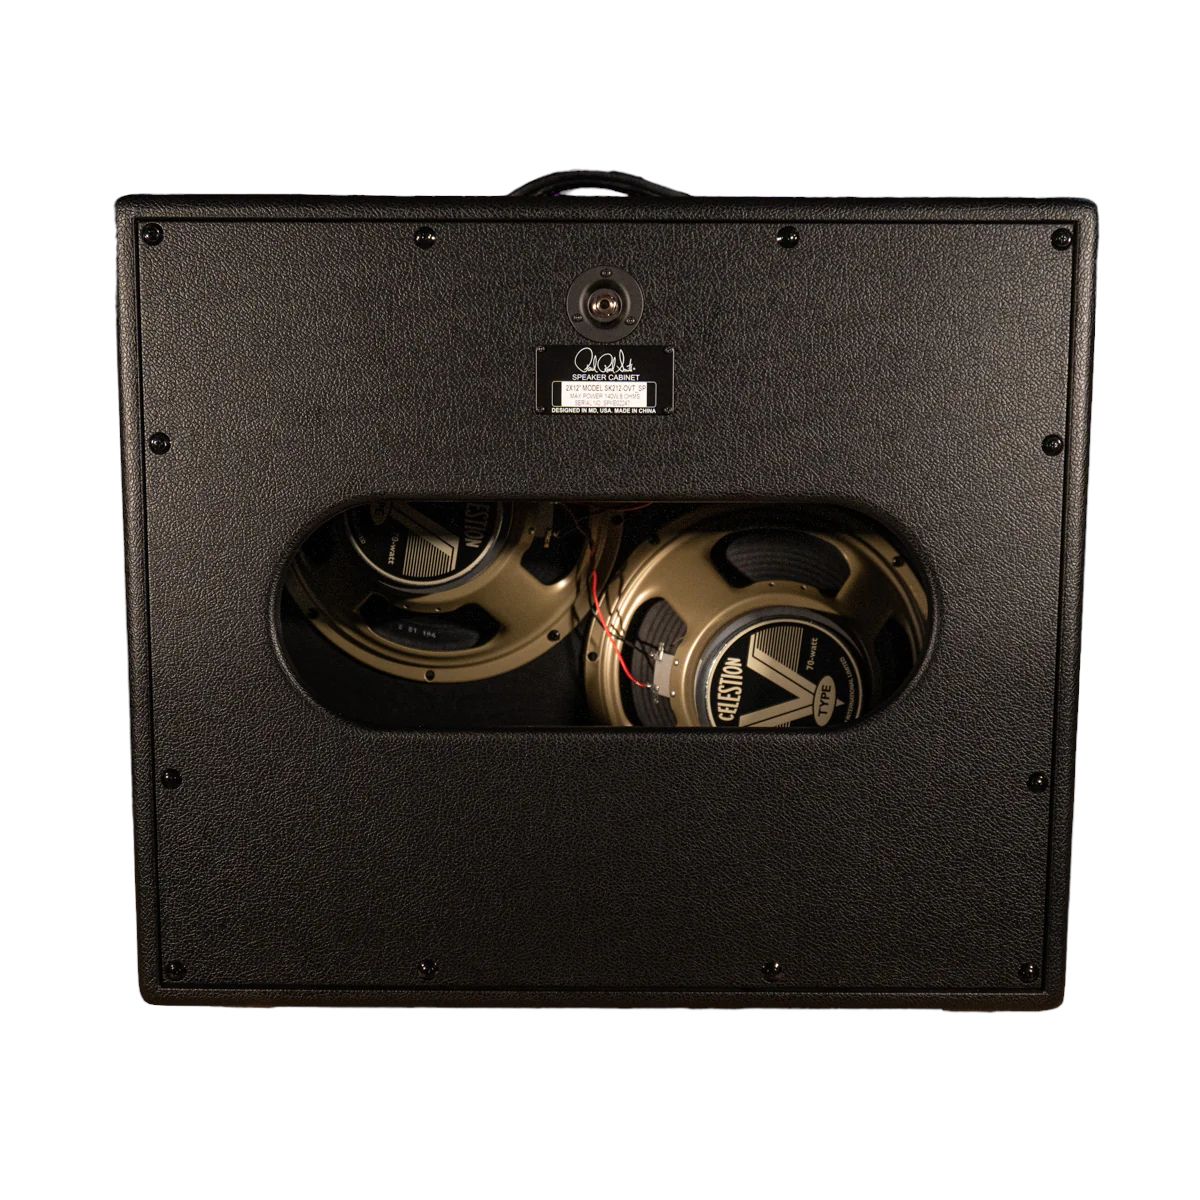 PRS 2x12 Cabinet Stealth & Pepper Grill open back по цене 55 330.00 ₽